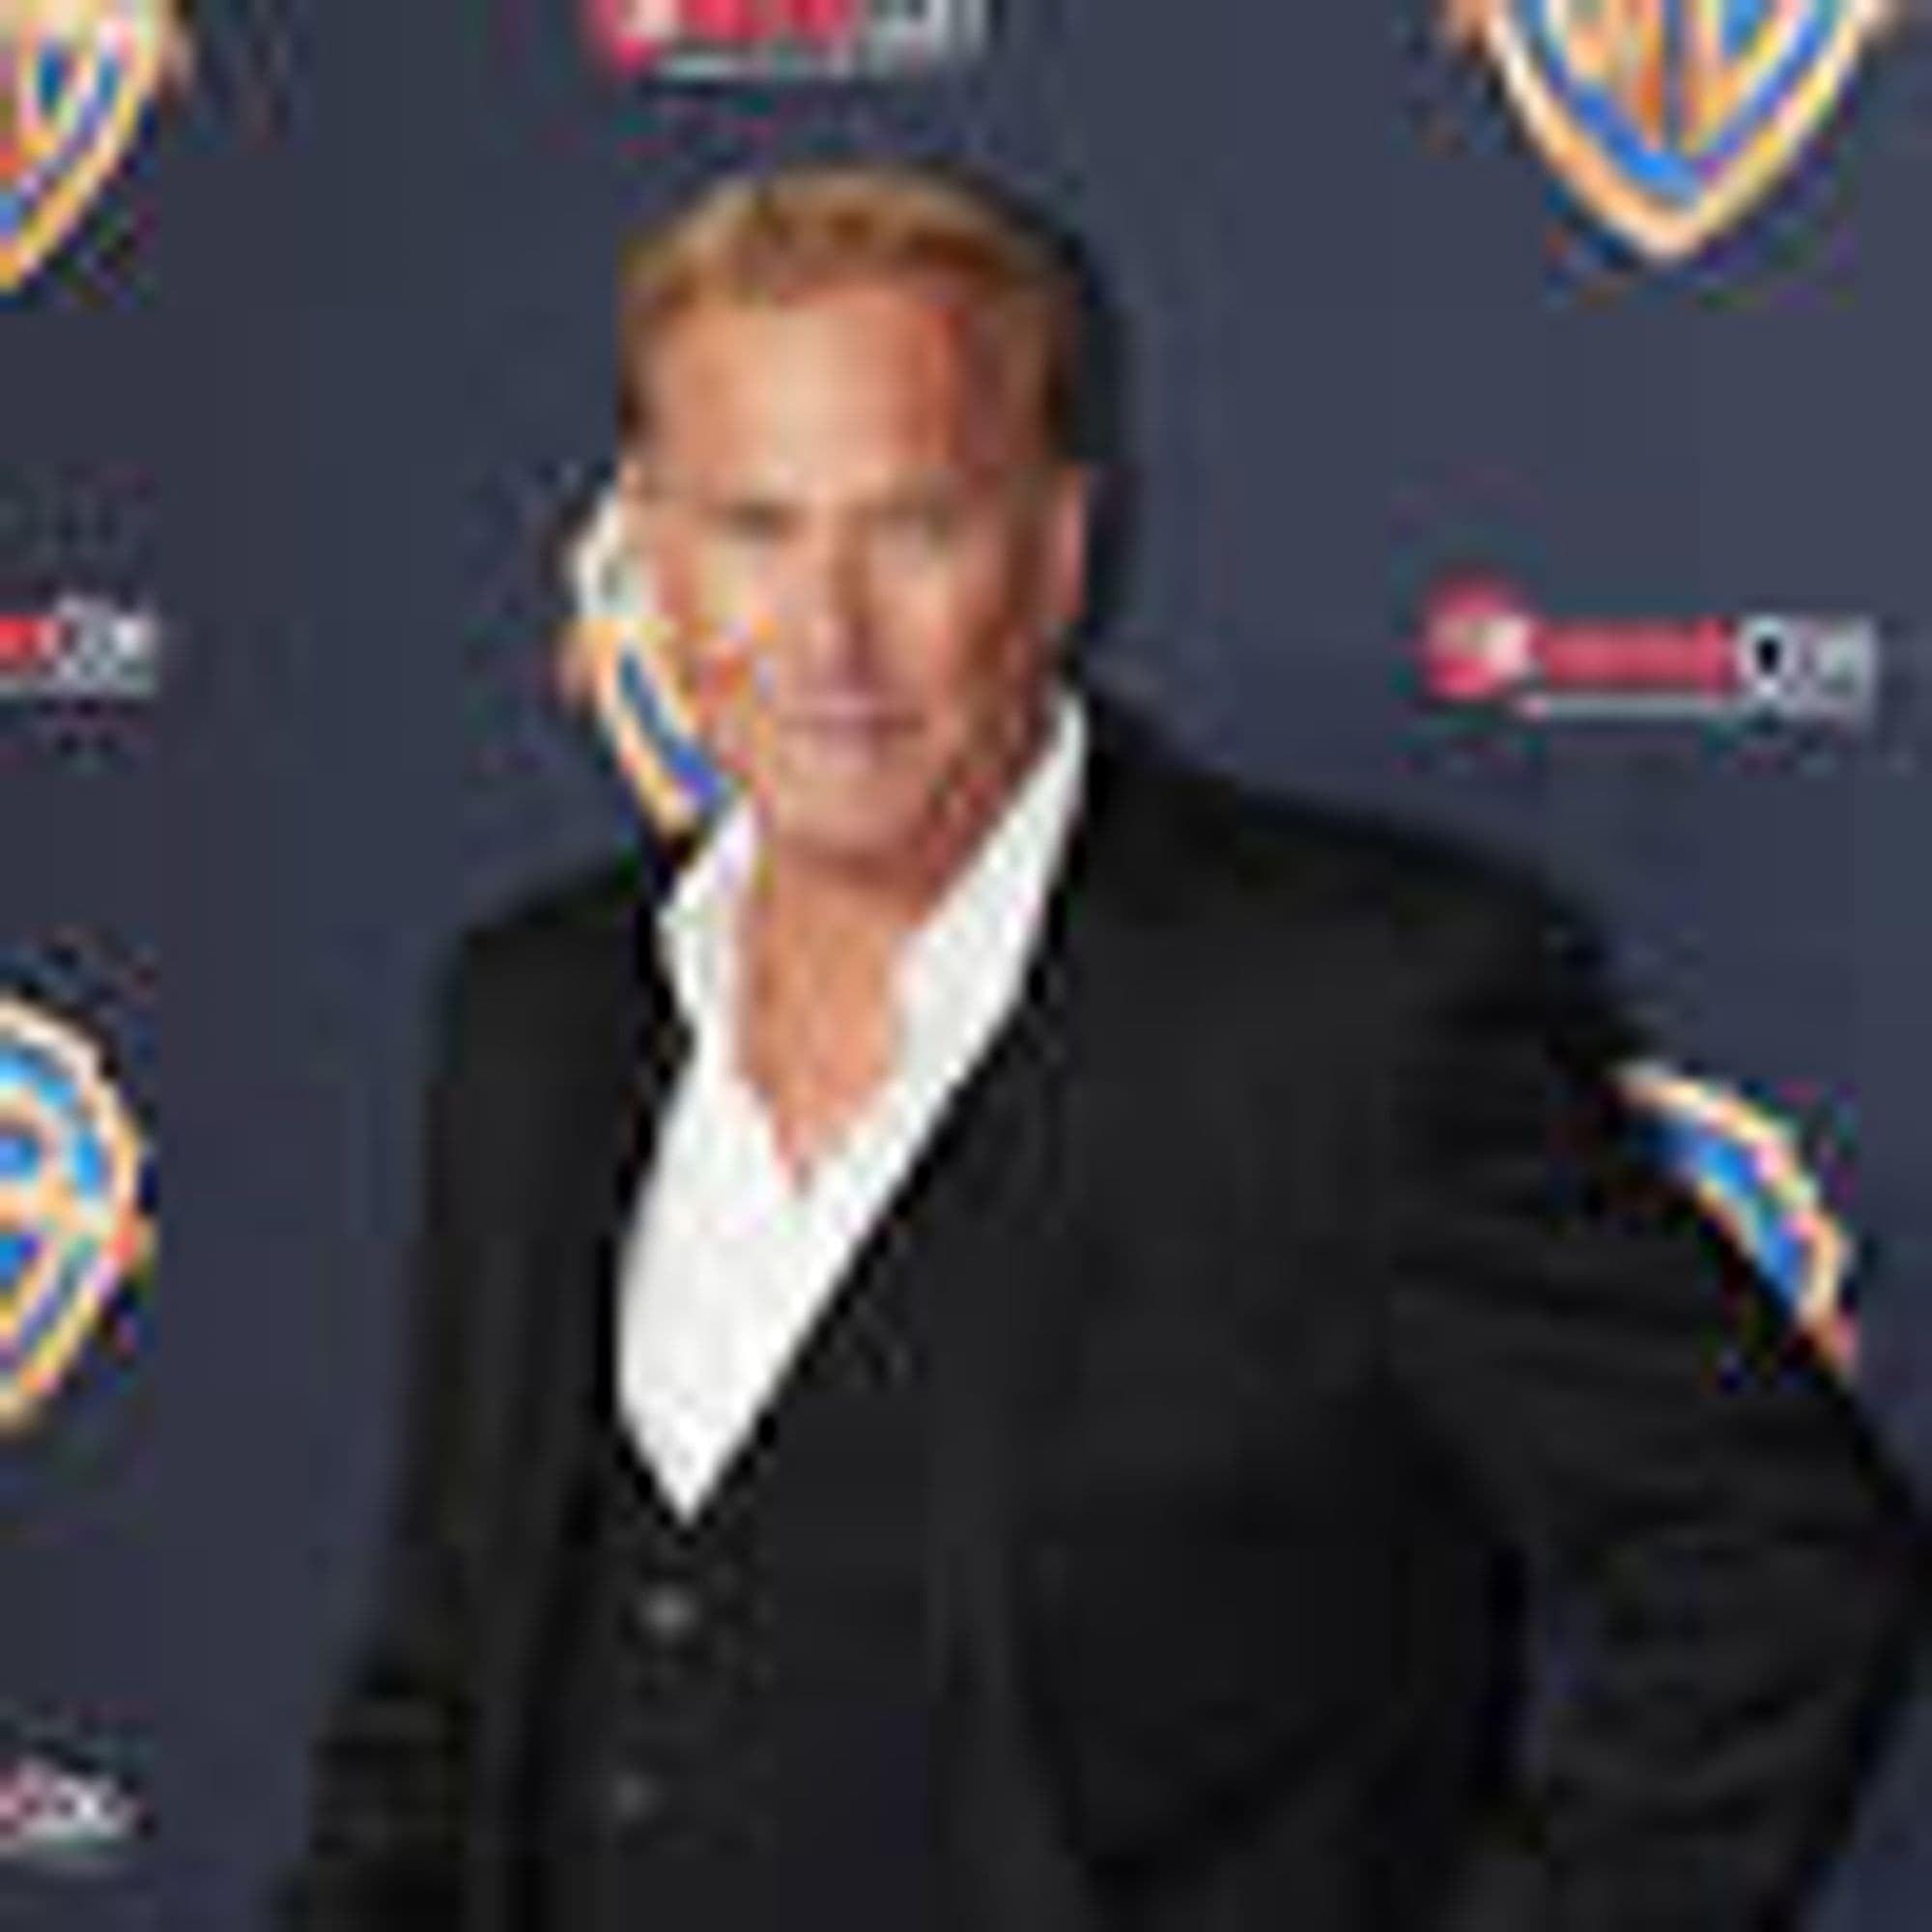 Kevin Costner's Epic Western 'Horizon: An American Saga' Takes Cannes by Storm